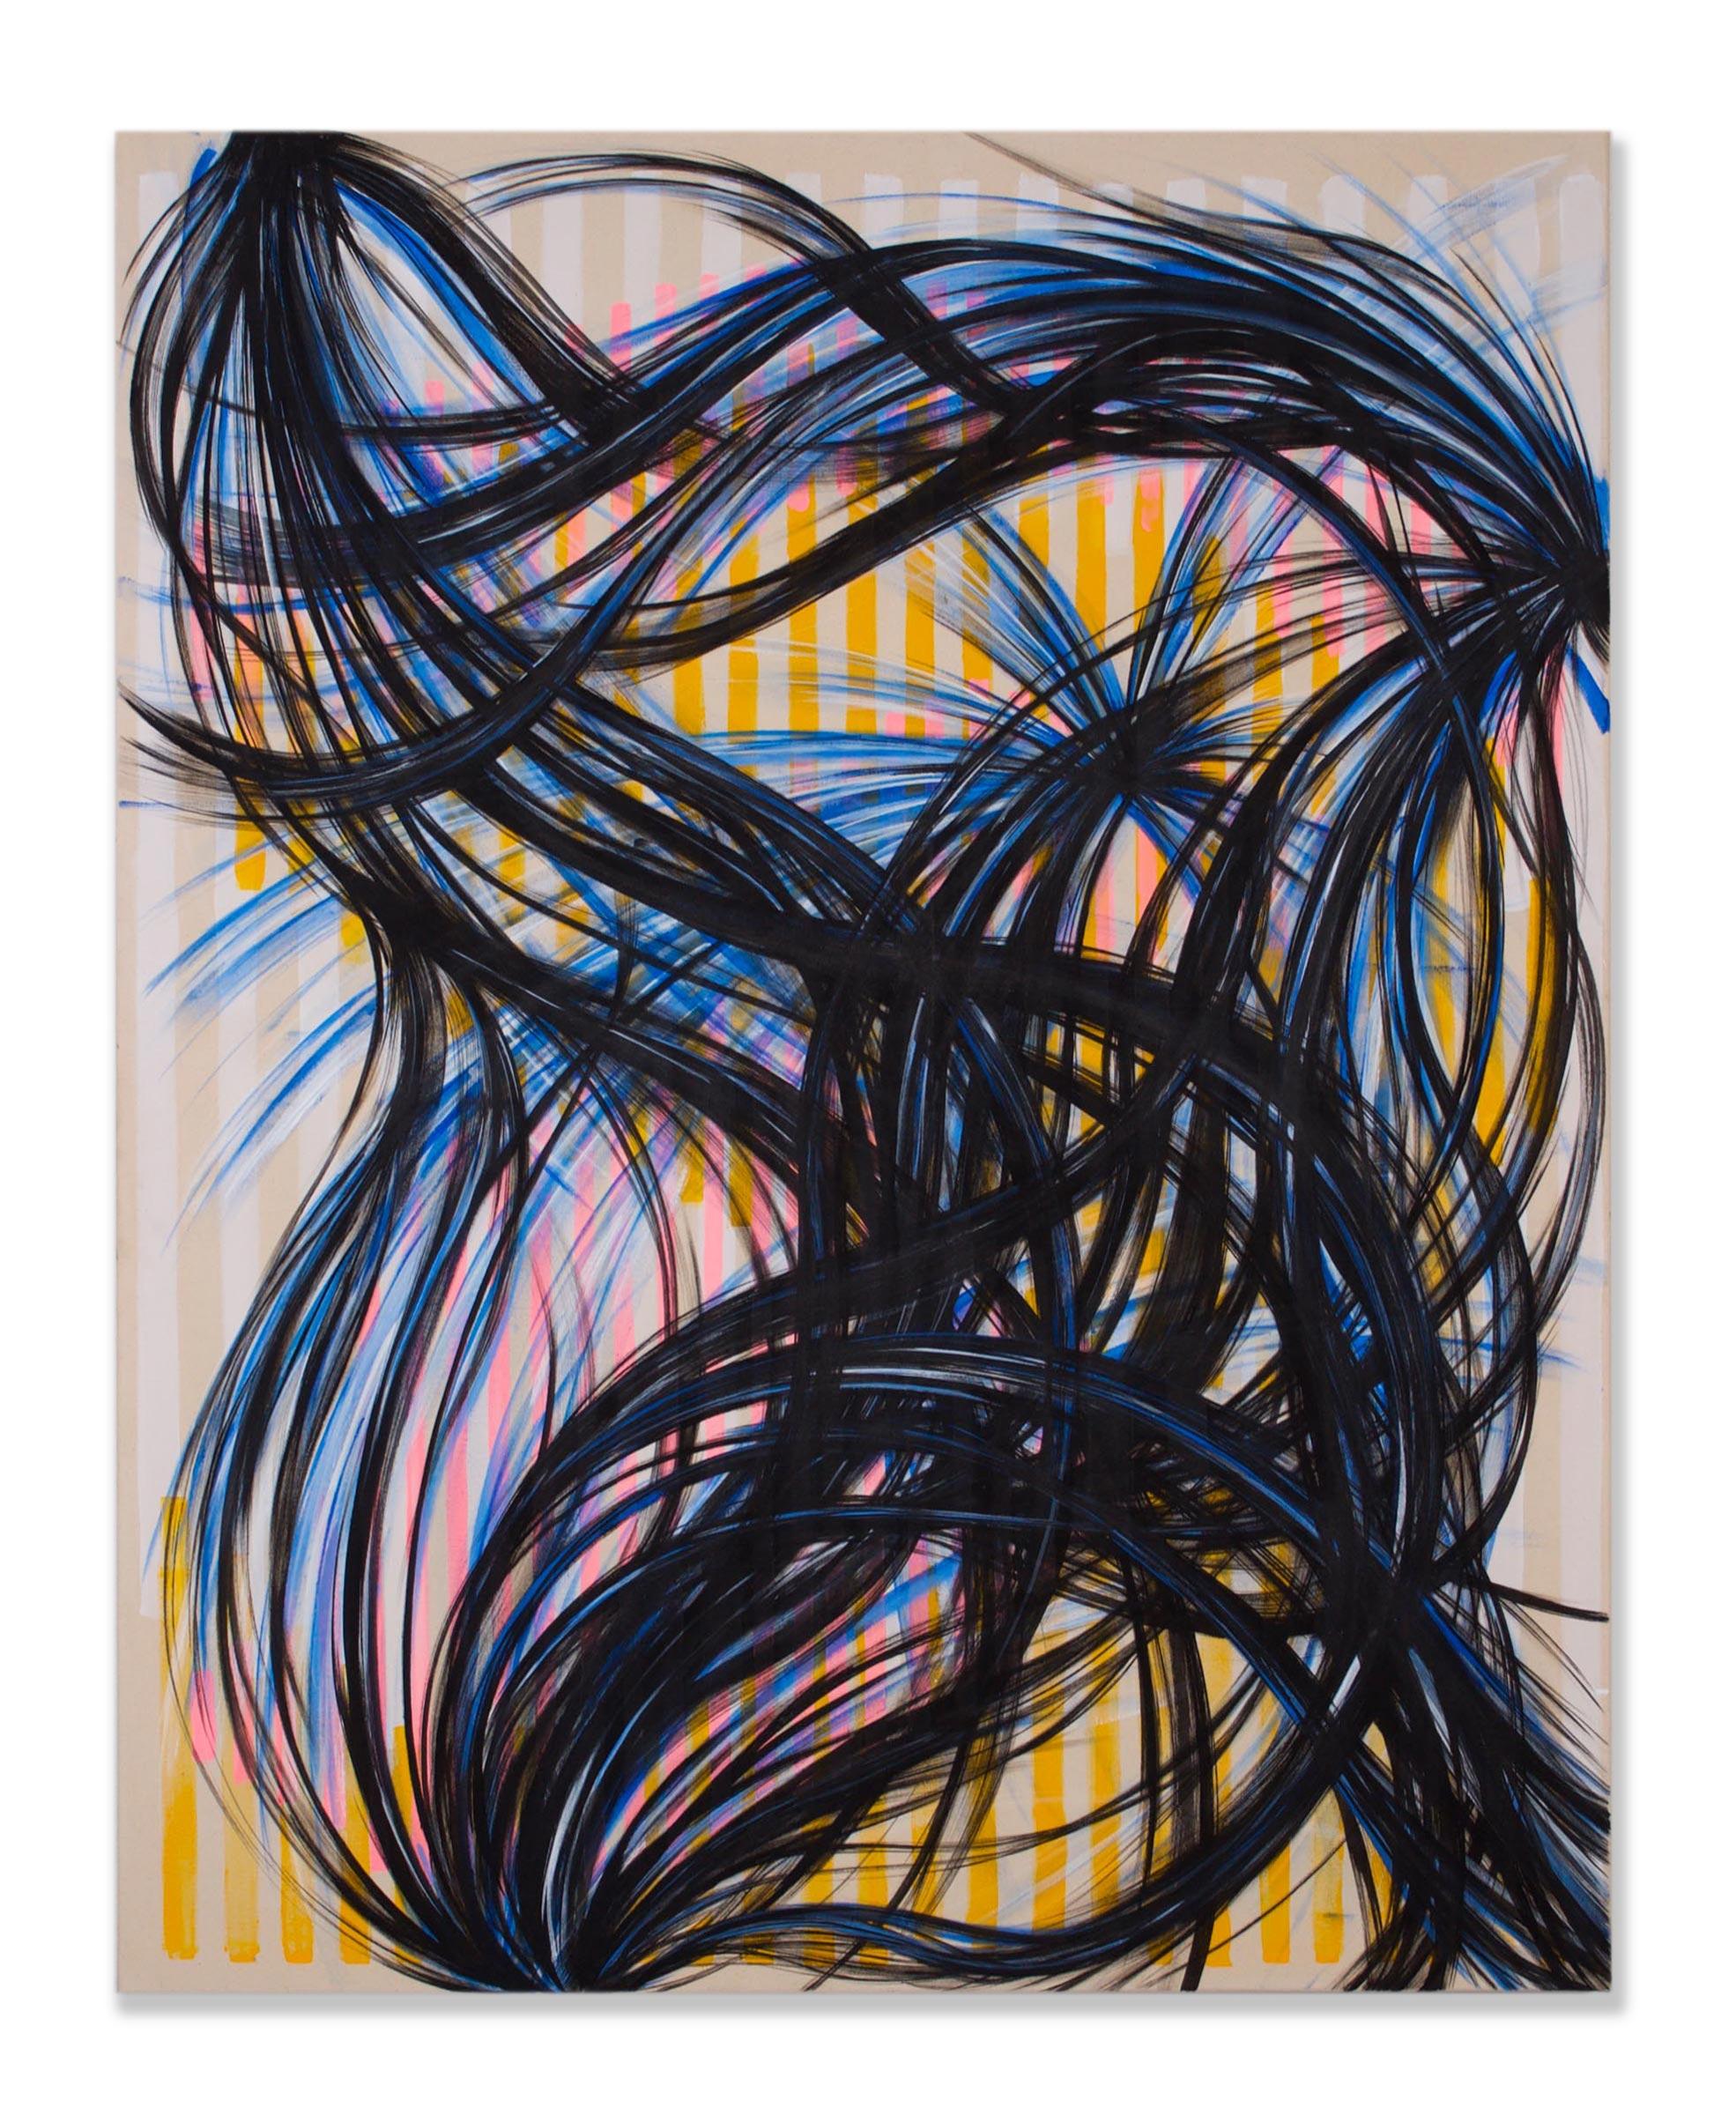 Julia Kaiser Abstract Painting - I don’t mind black. Only on Fridays, Acrylic on raw canvas, 120 x 150cm, 2021